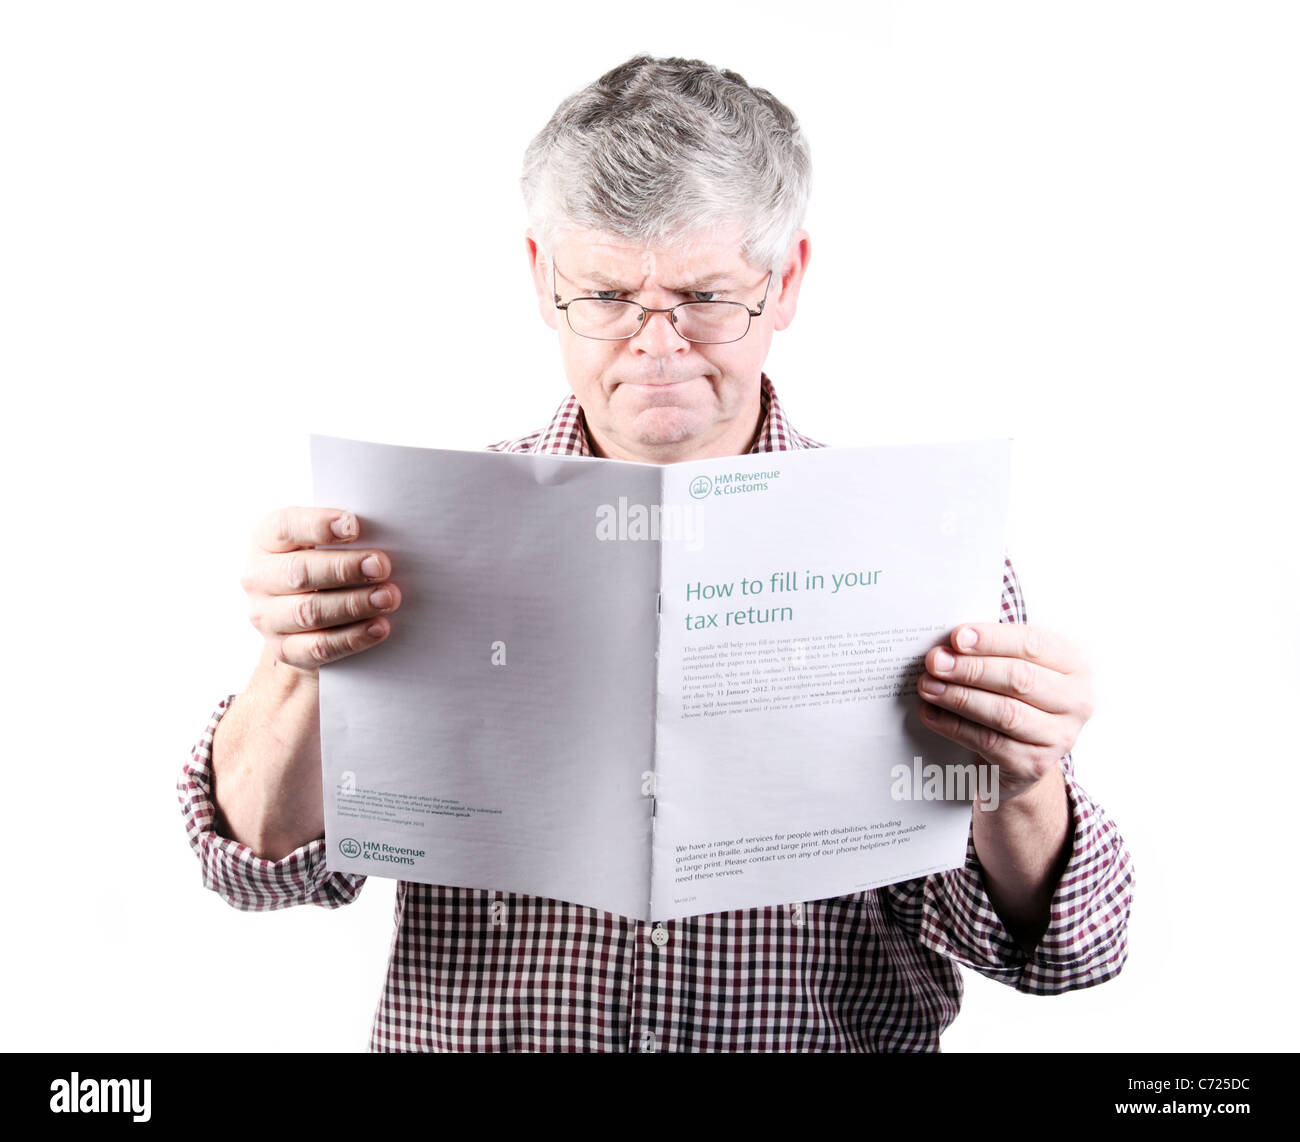 Personal Finance Concept; Middle Aged Man Reading Inland Revenue Tax Return Help Pamphlet Stock Photo